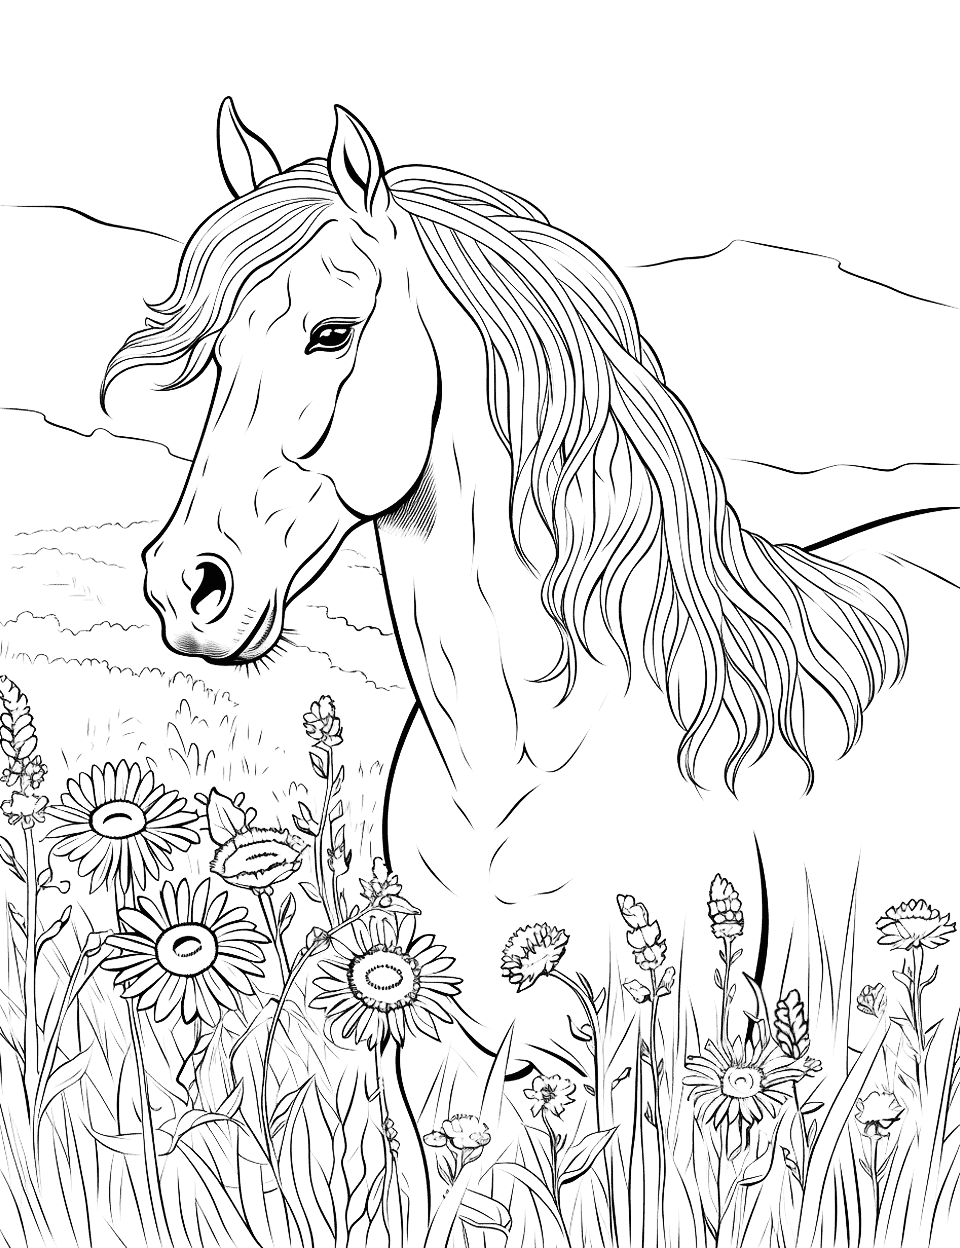 Horse Grazing in the Meadow Adult Coloring Page - A horse with a flowing mane visiting a meadow.